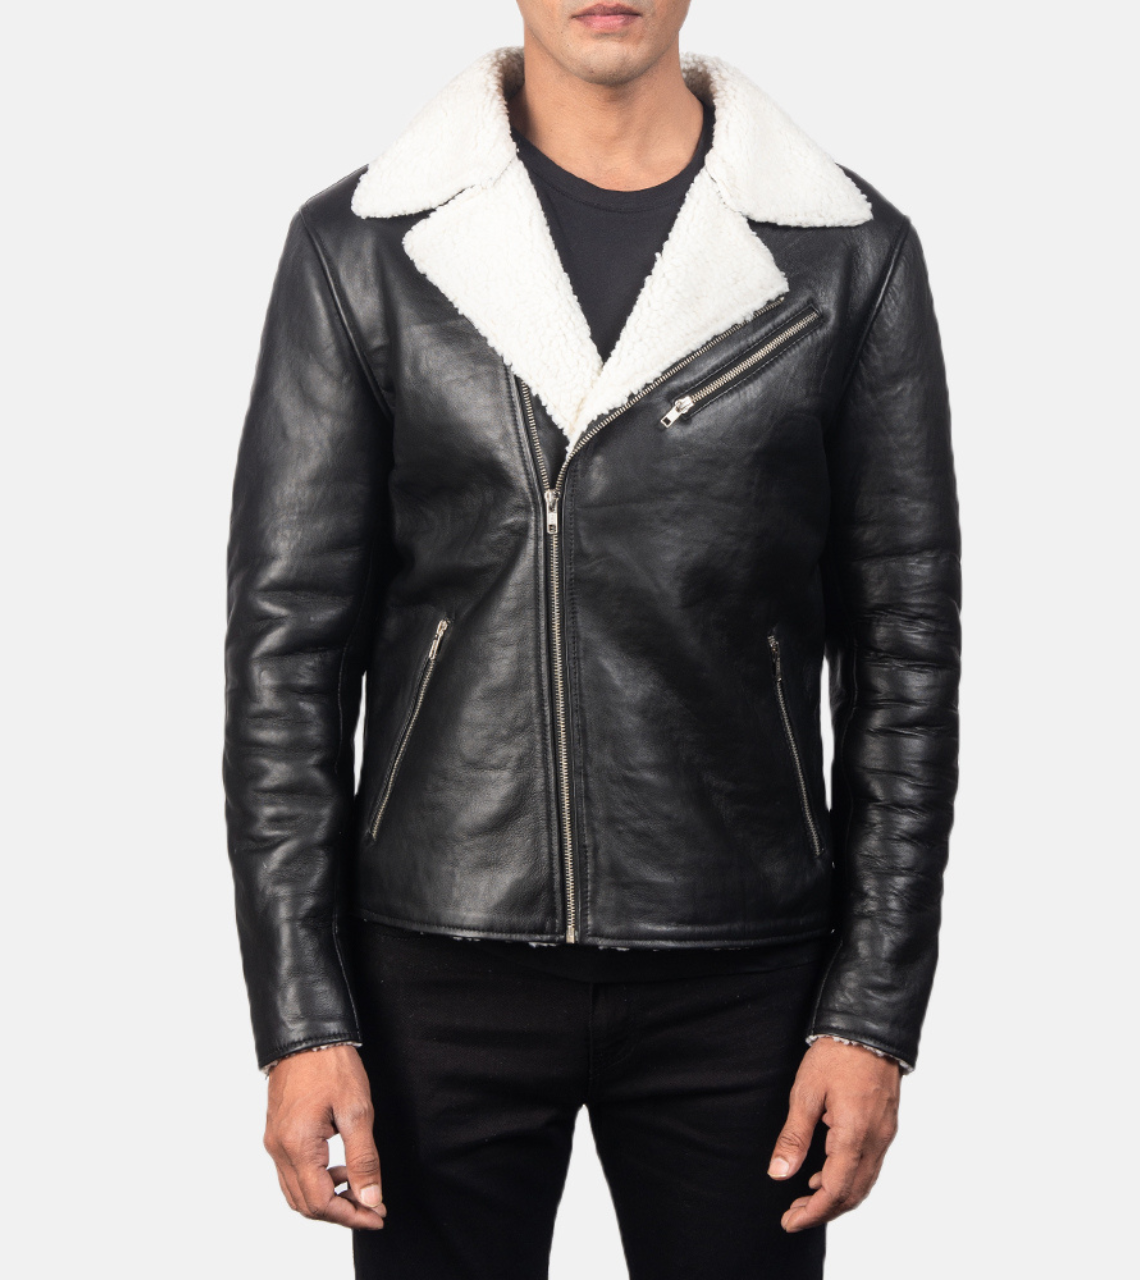  Pacific White Men's Leather Bomber Jacket 